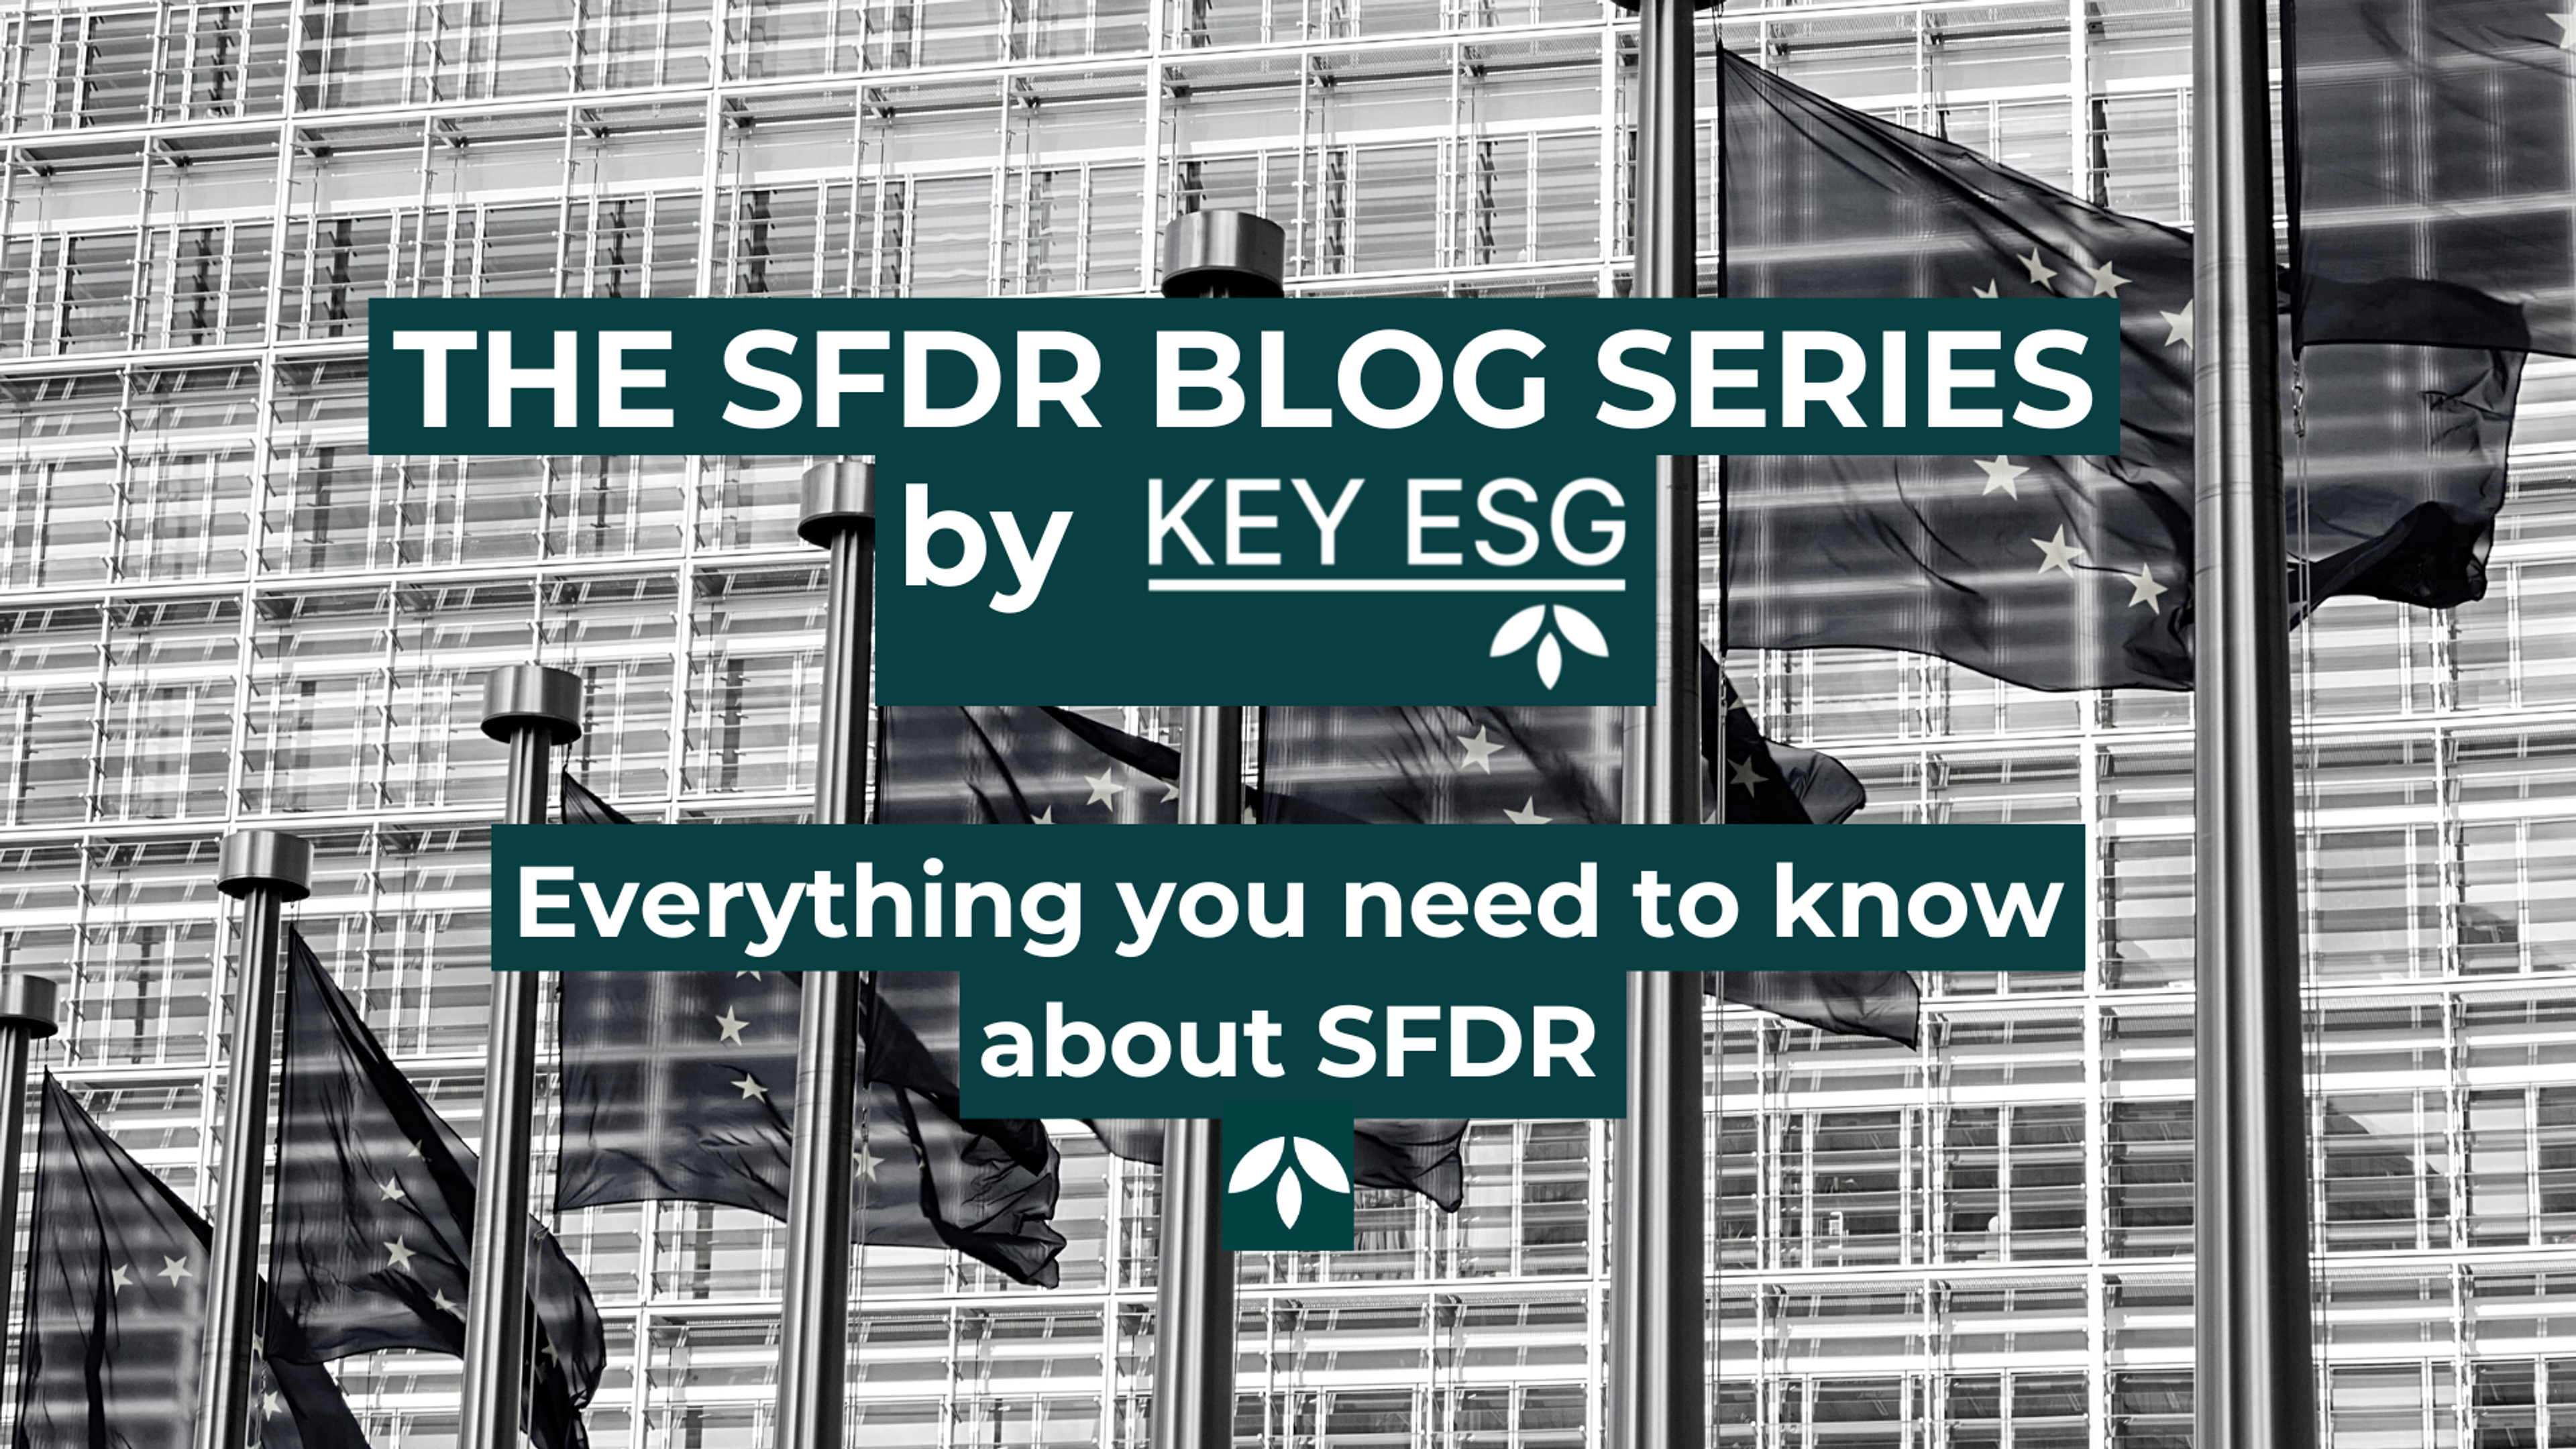 Navigate the SFDR regulation confidently with our blog series written by ESG experts